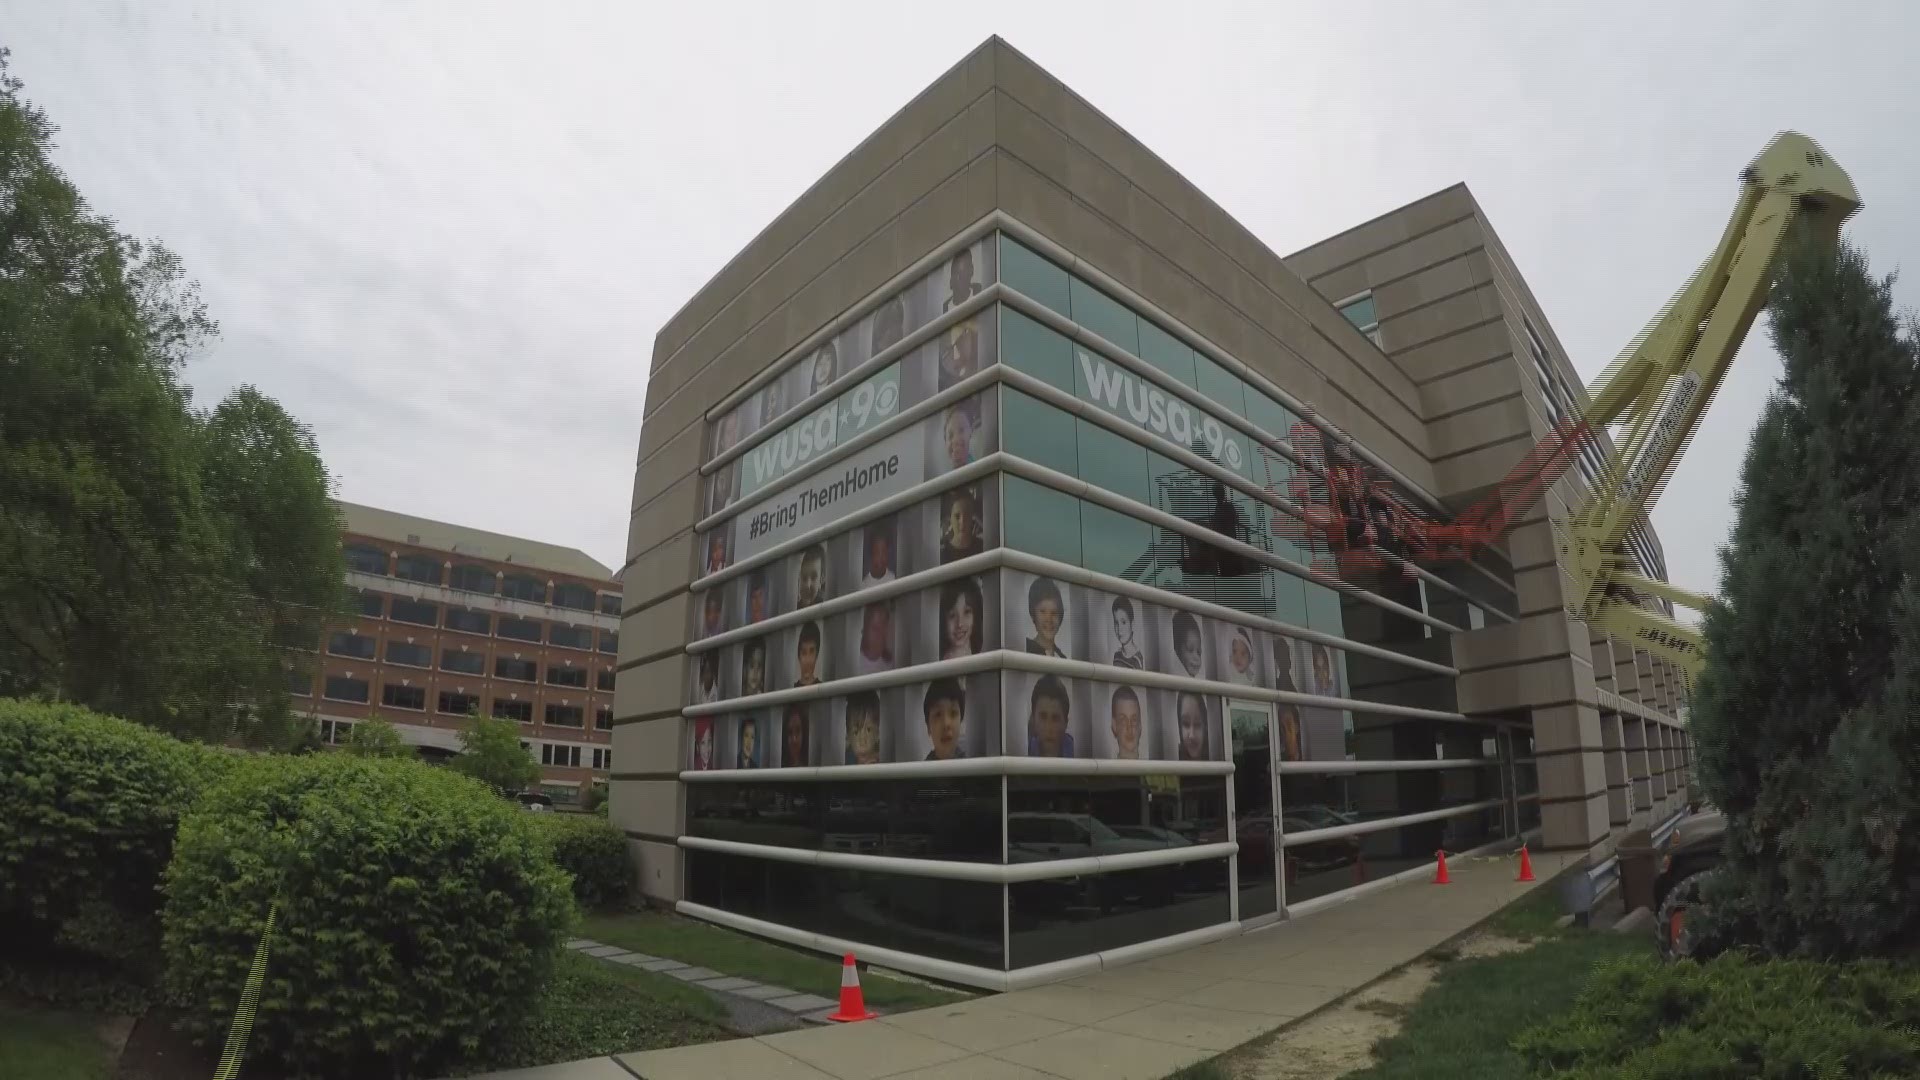 WUSA9 shot a timelapse of the installation on its building with the faces of DC's missing children.